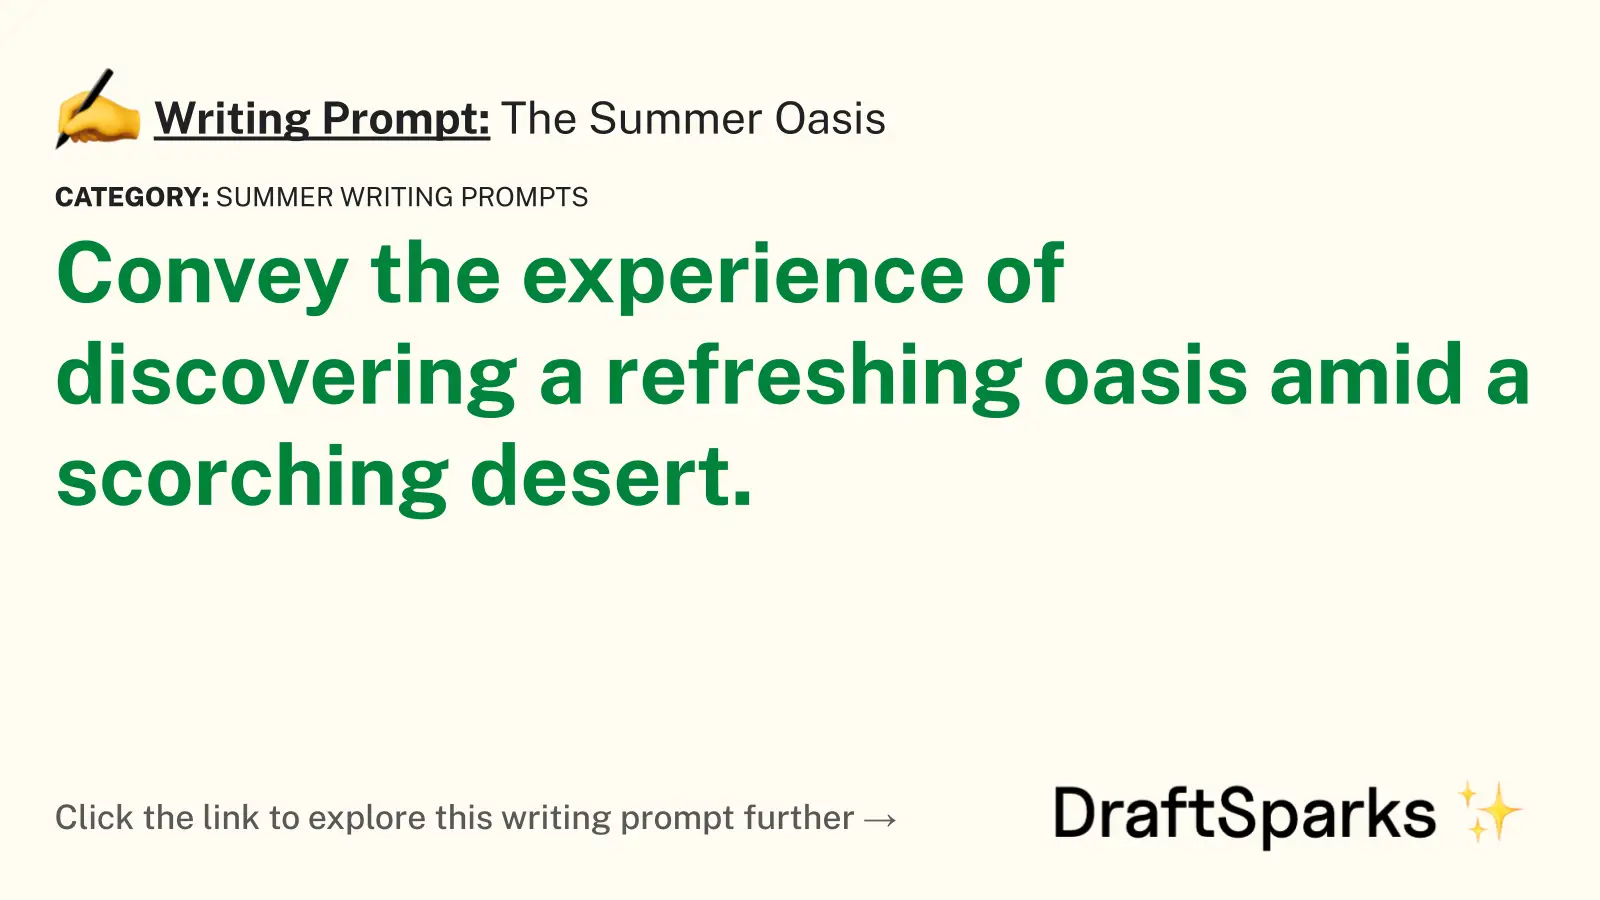 The Summer Oasis